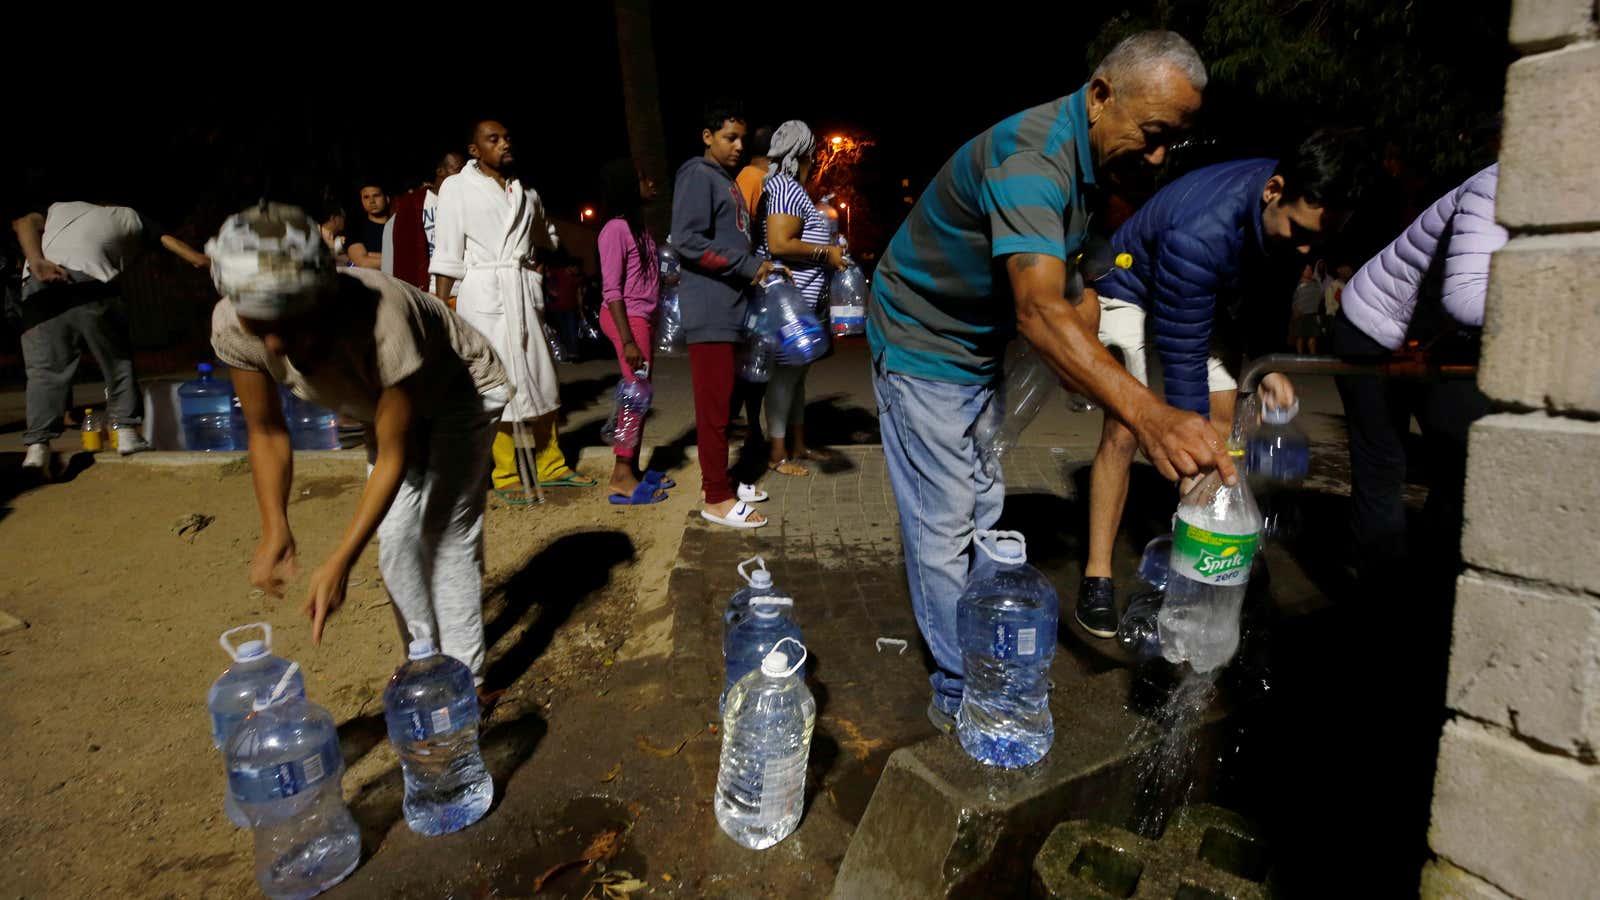 Queueing for water during Cape Town s water crisis, Jan. 25, 2018.